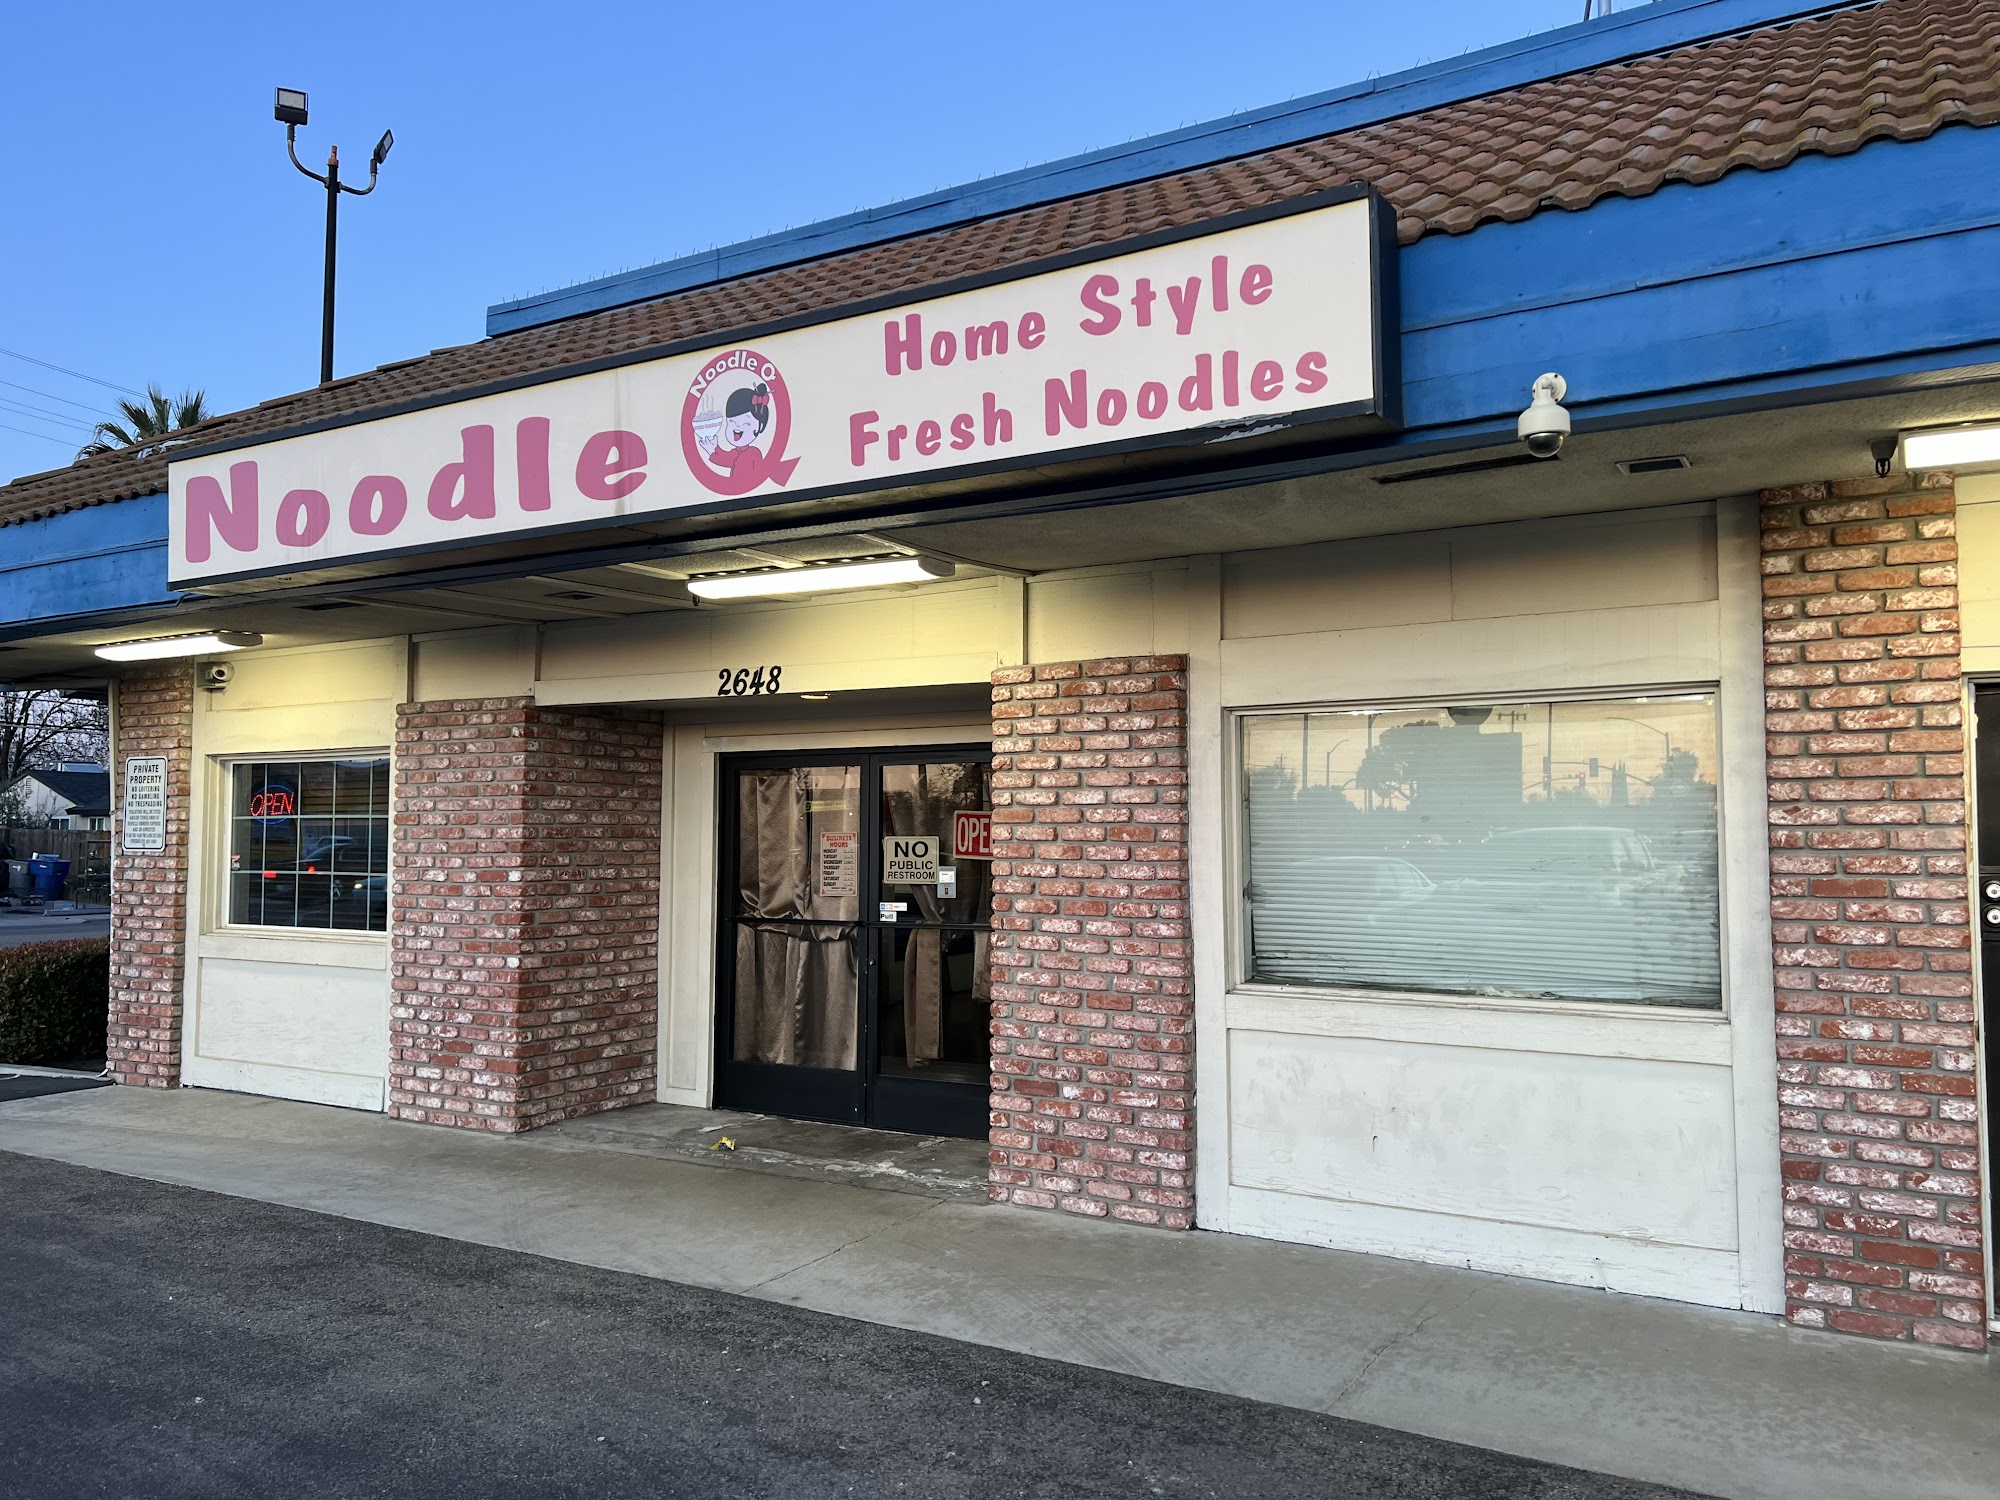 Noodle Q - Home Style Fresh Noodles and Sushi